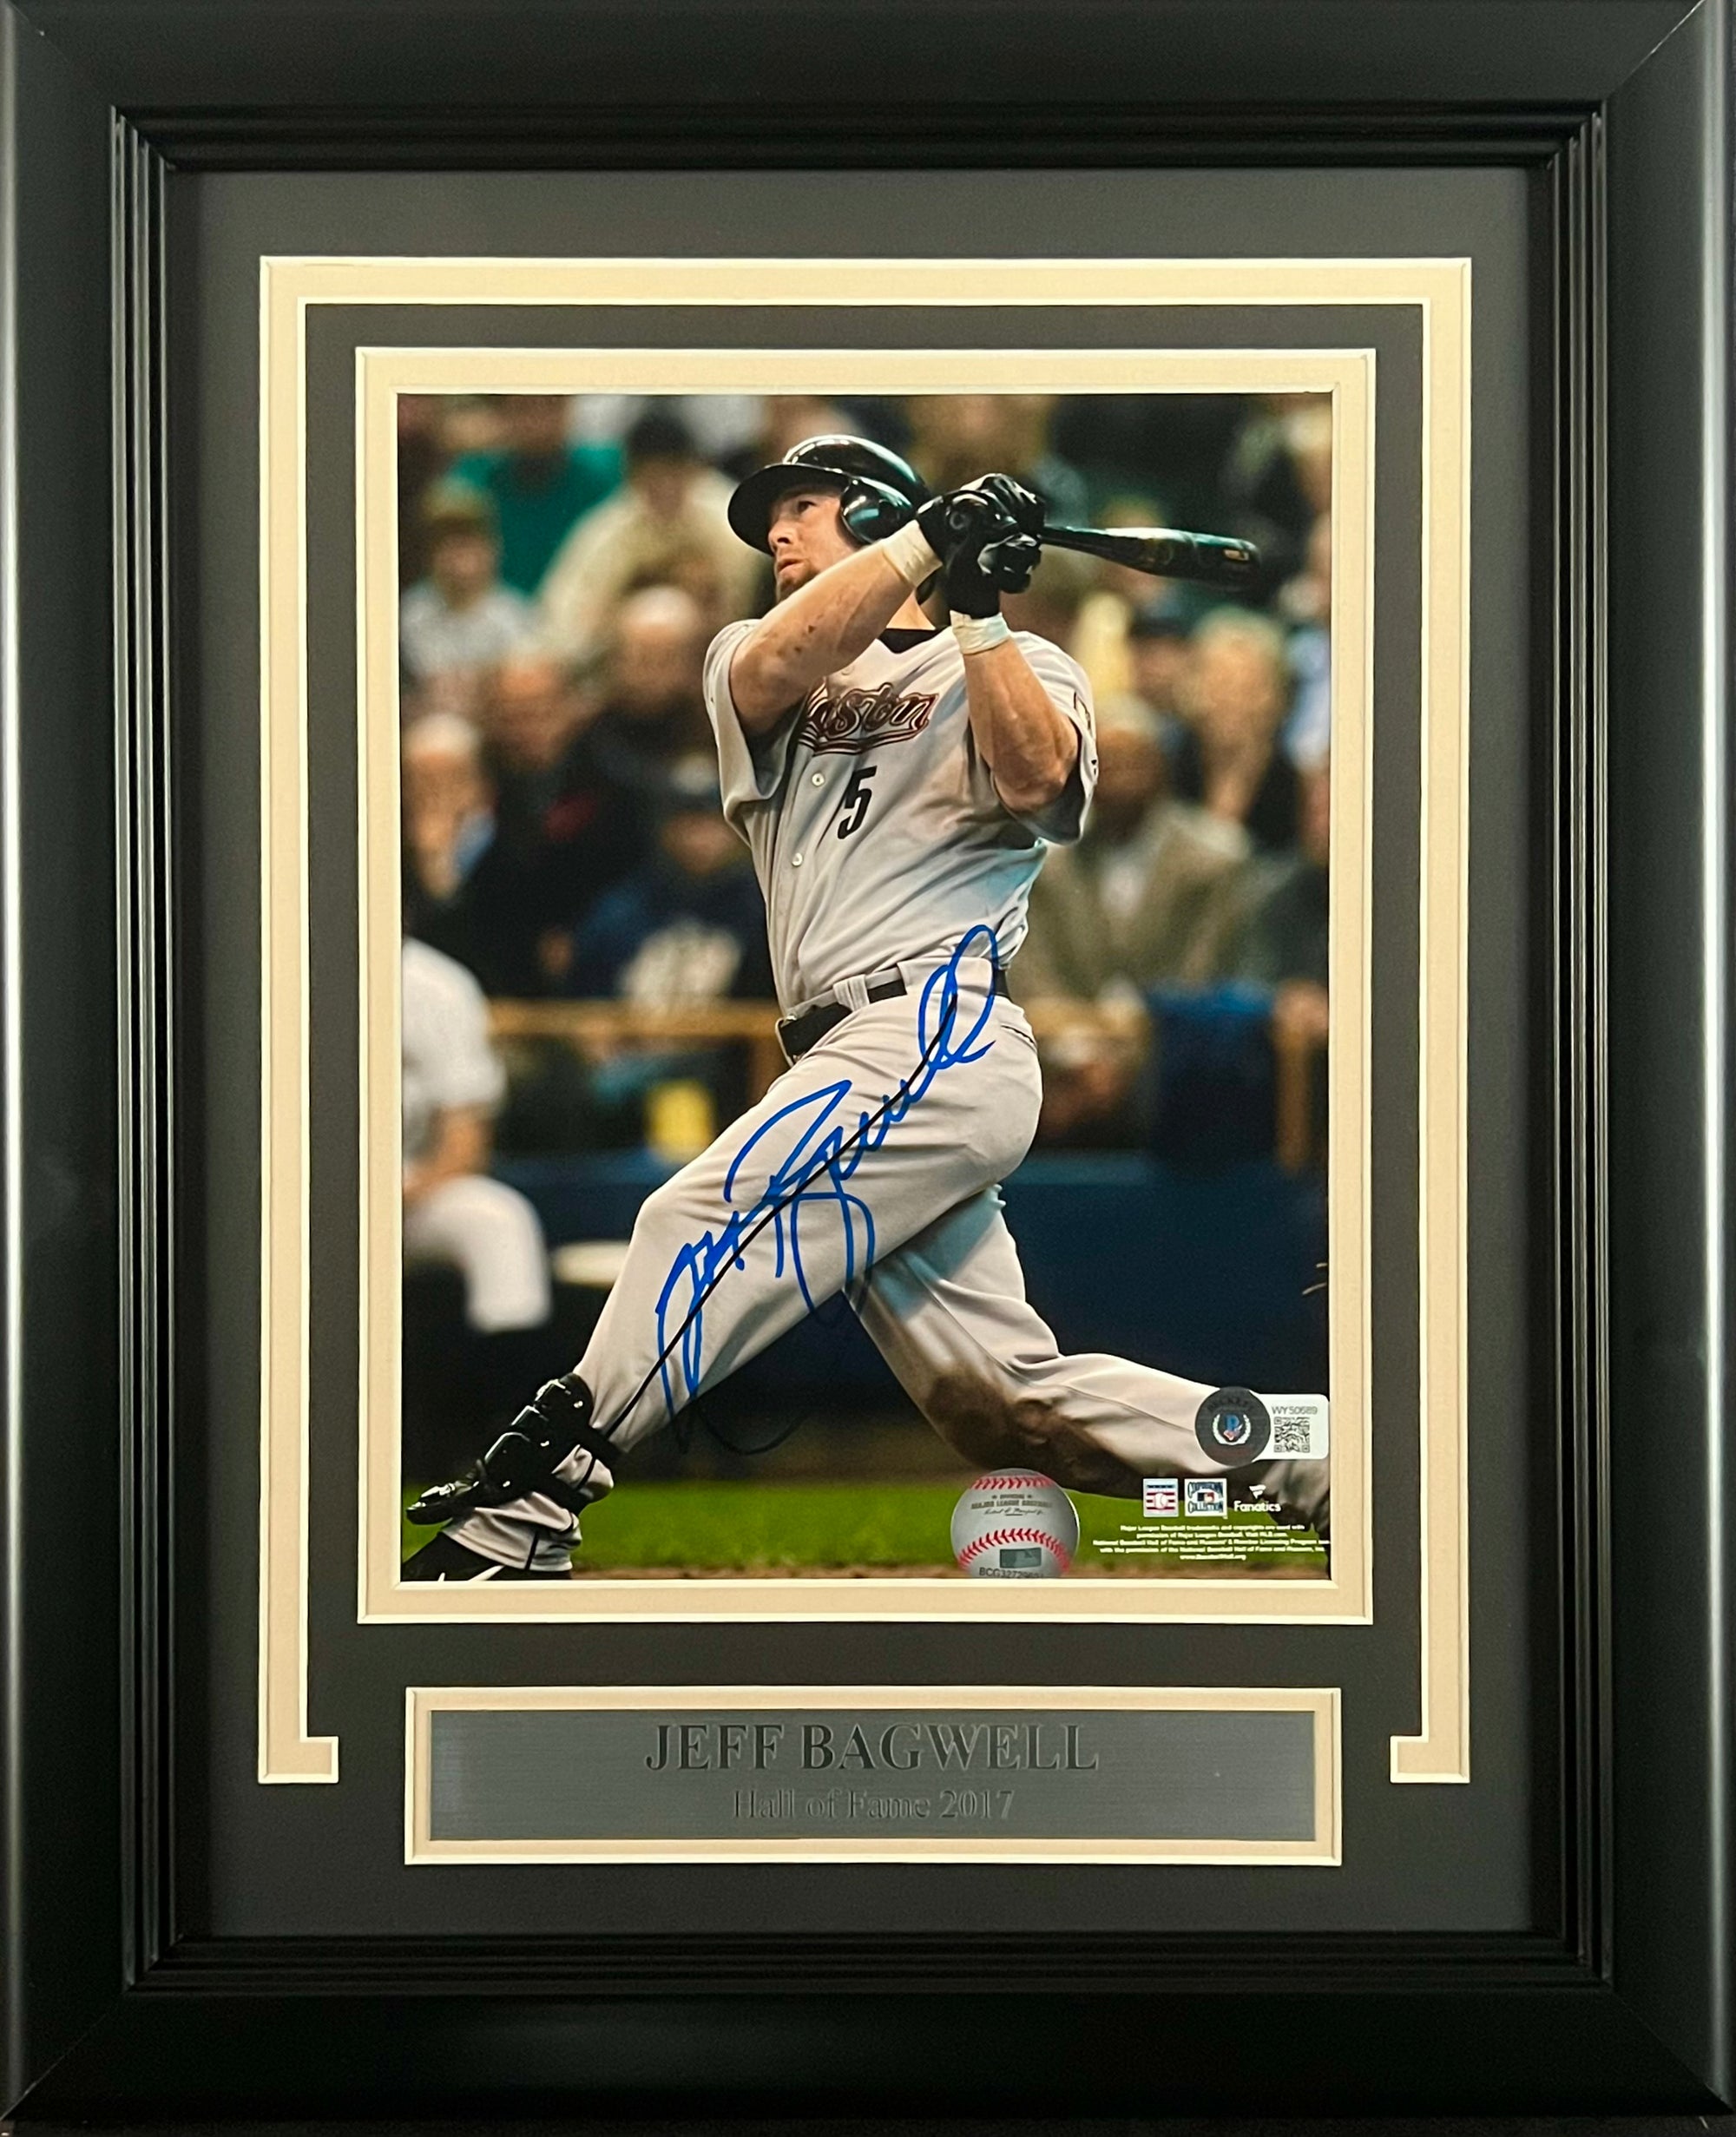 Jeff Bagwell Houston Astros Autographed 8x10 Photo Framed